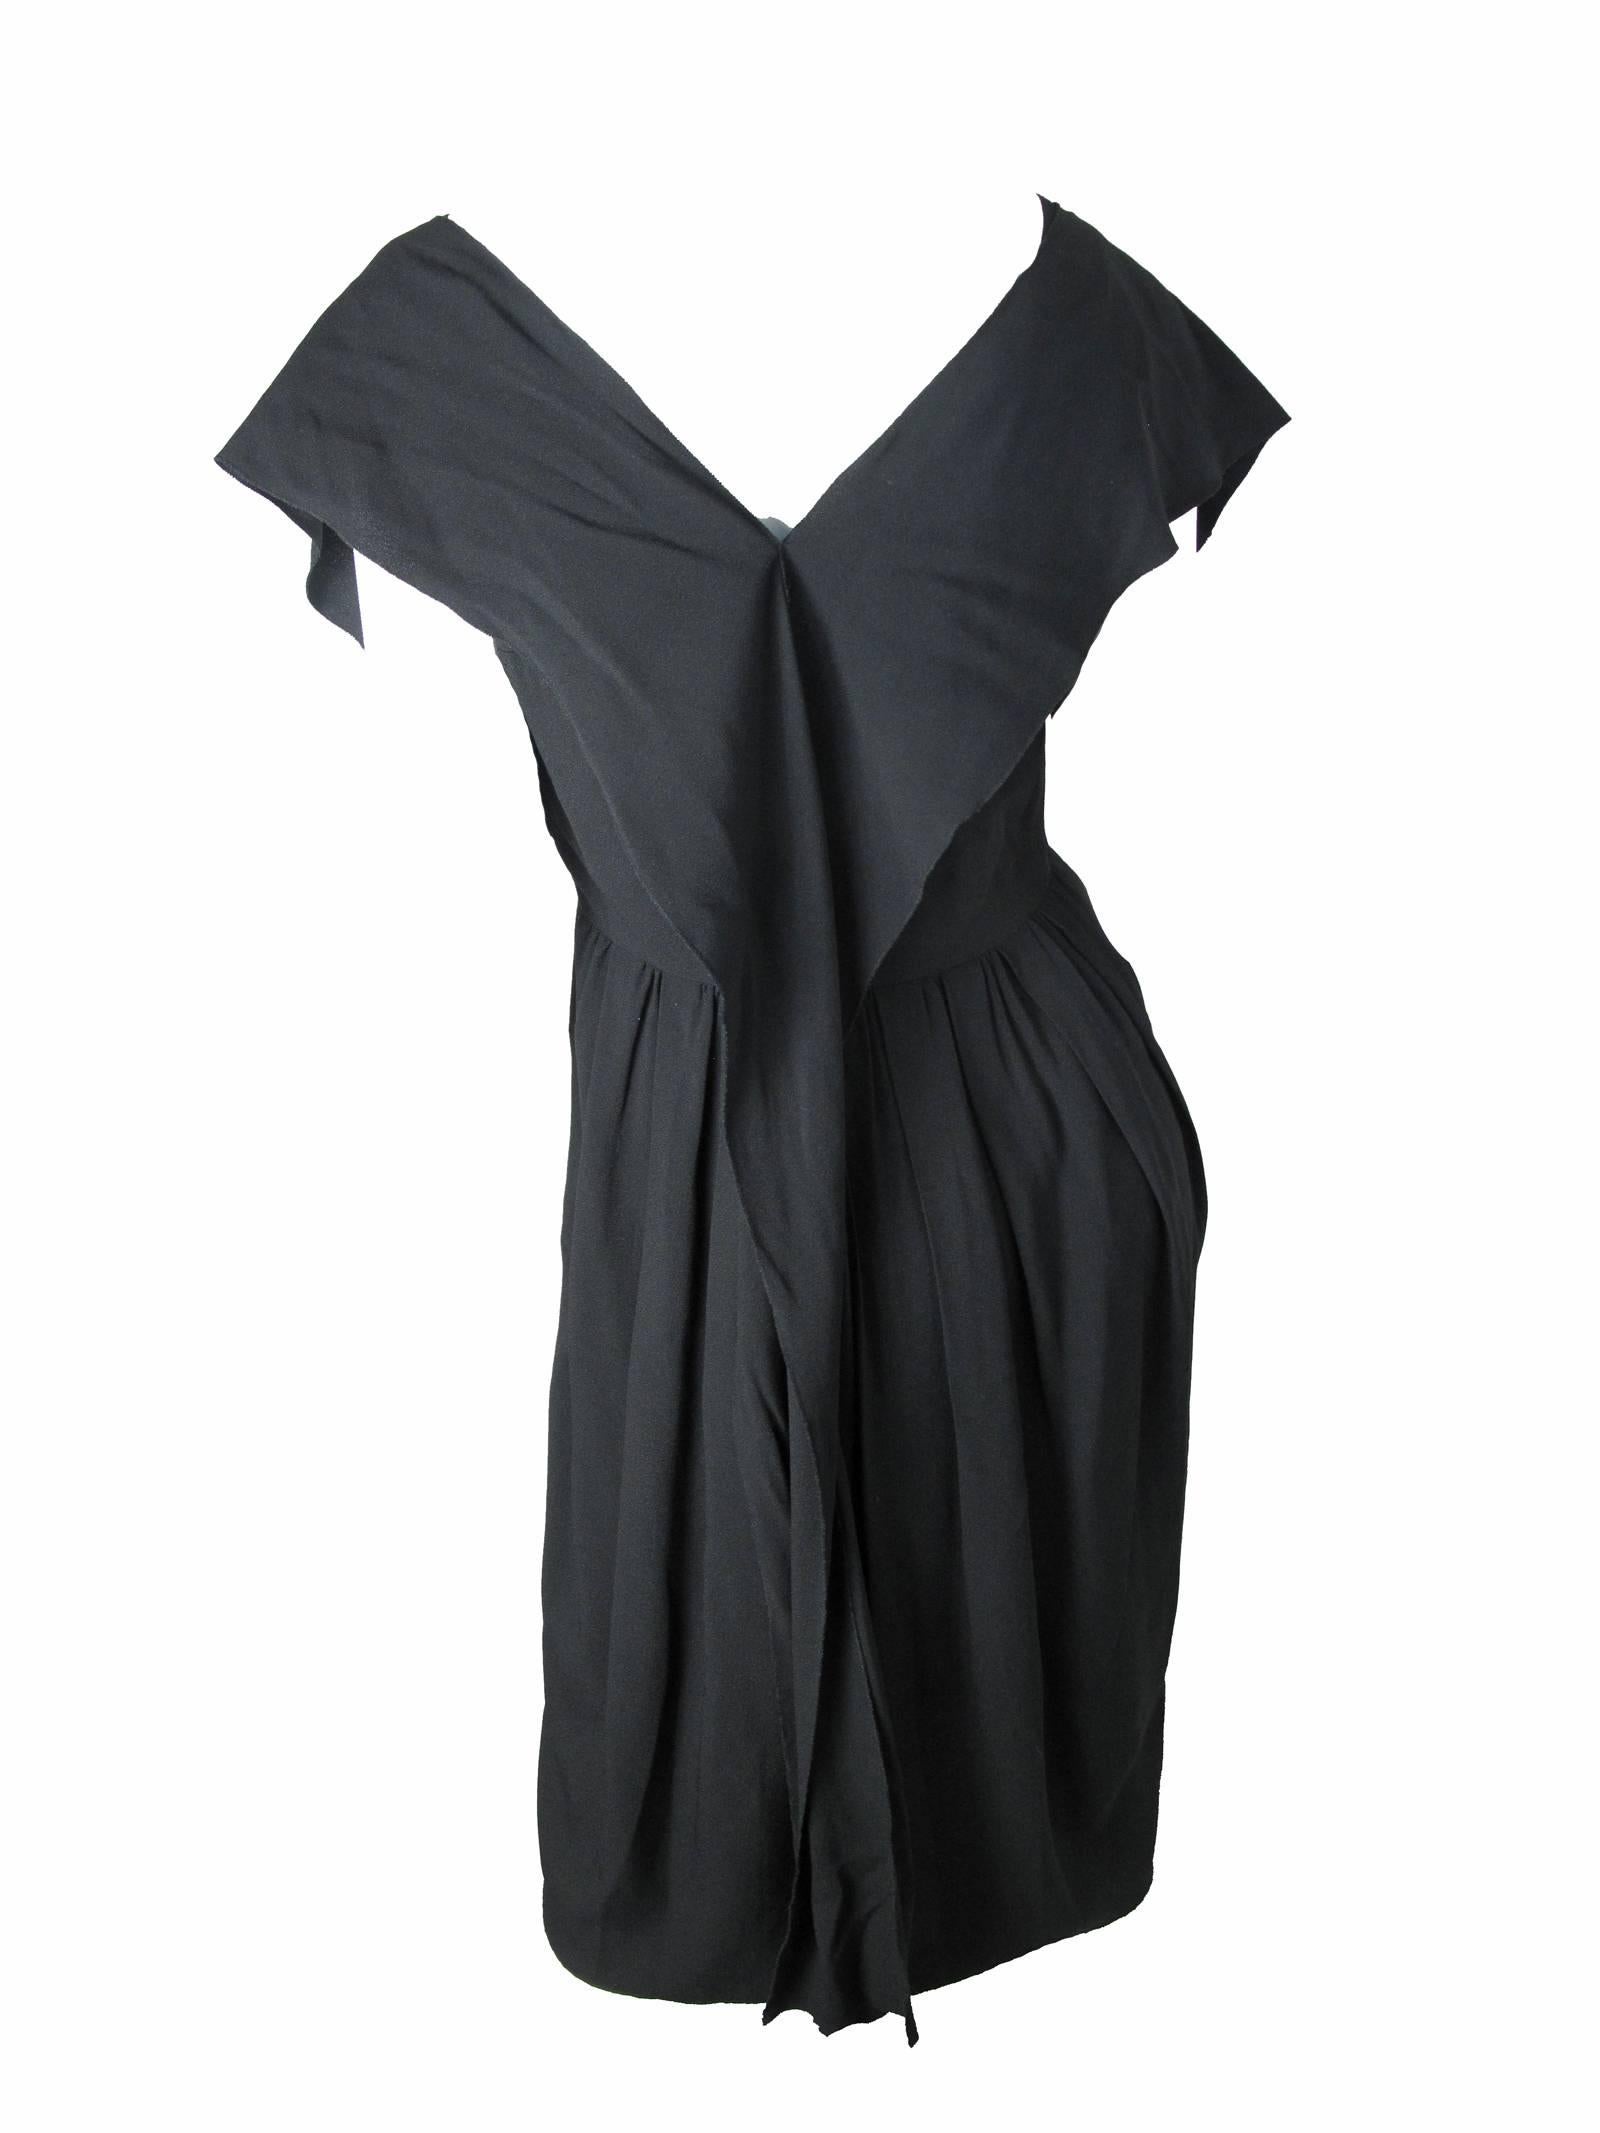 Prada black acetate and viscose dress.  Condition: Excellent. Size 44
Made in Italy  .  35